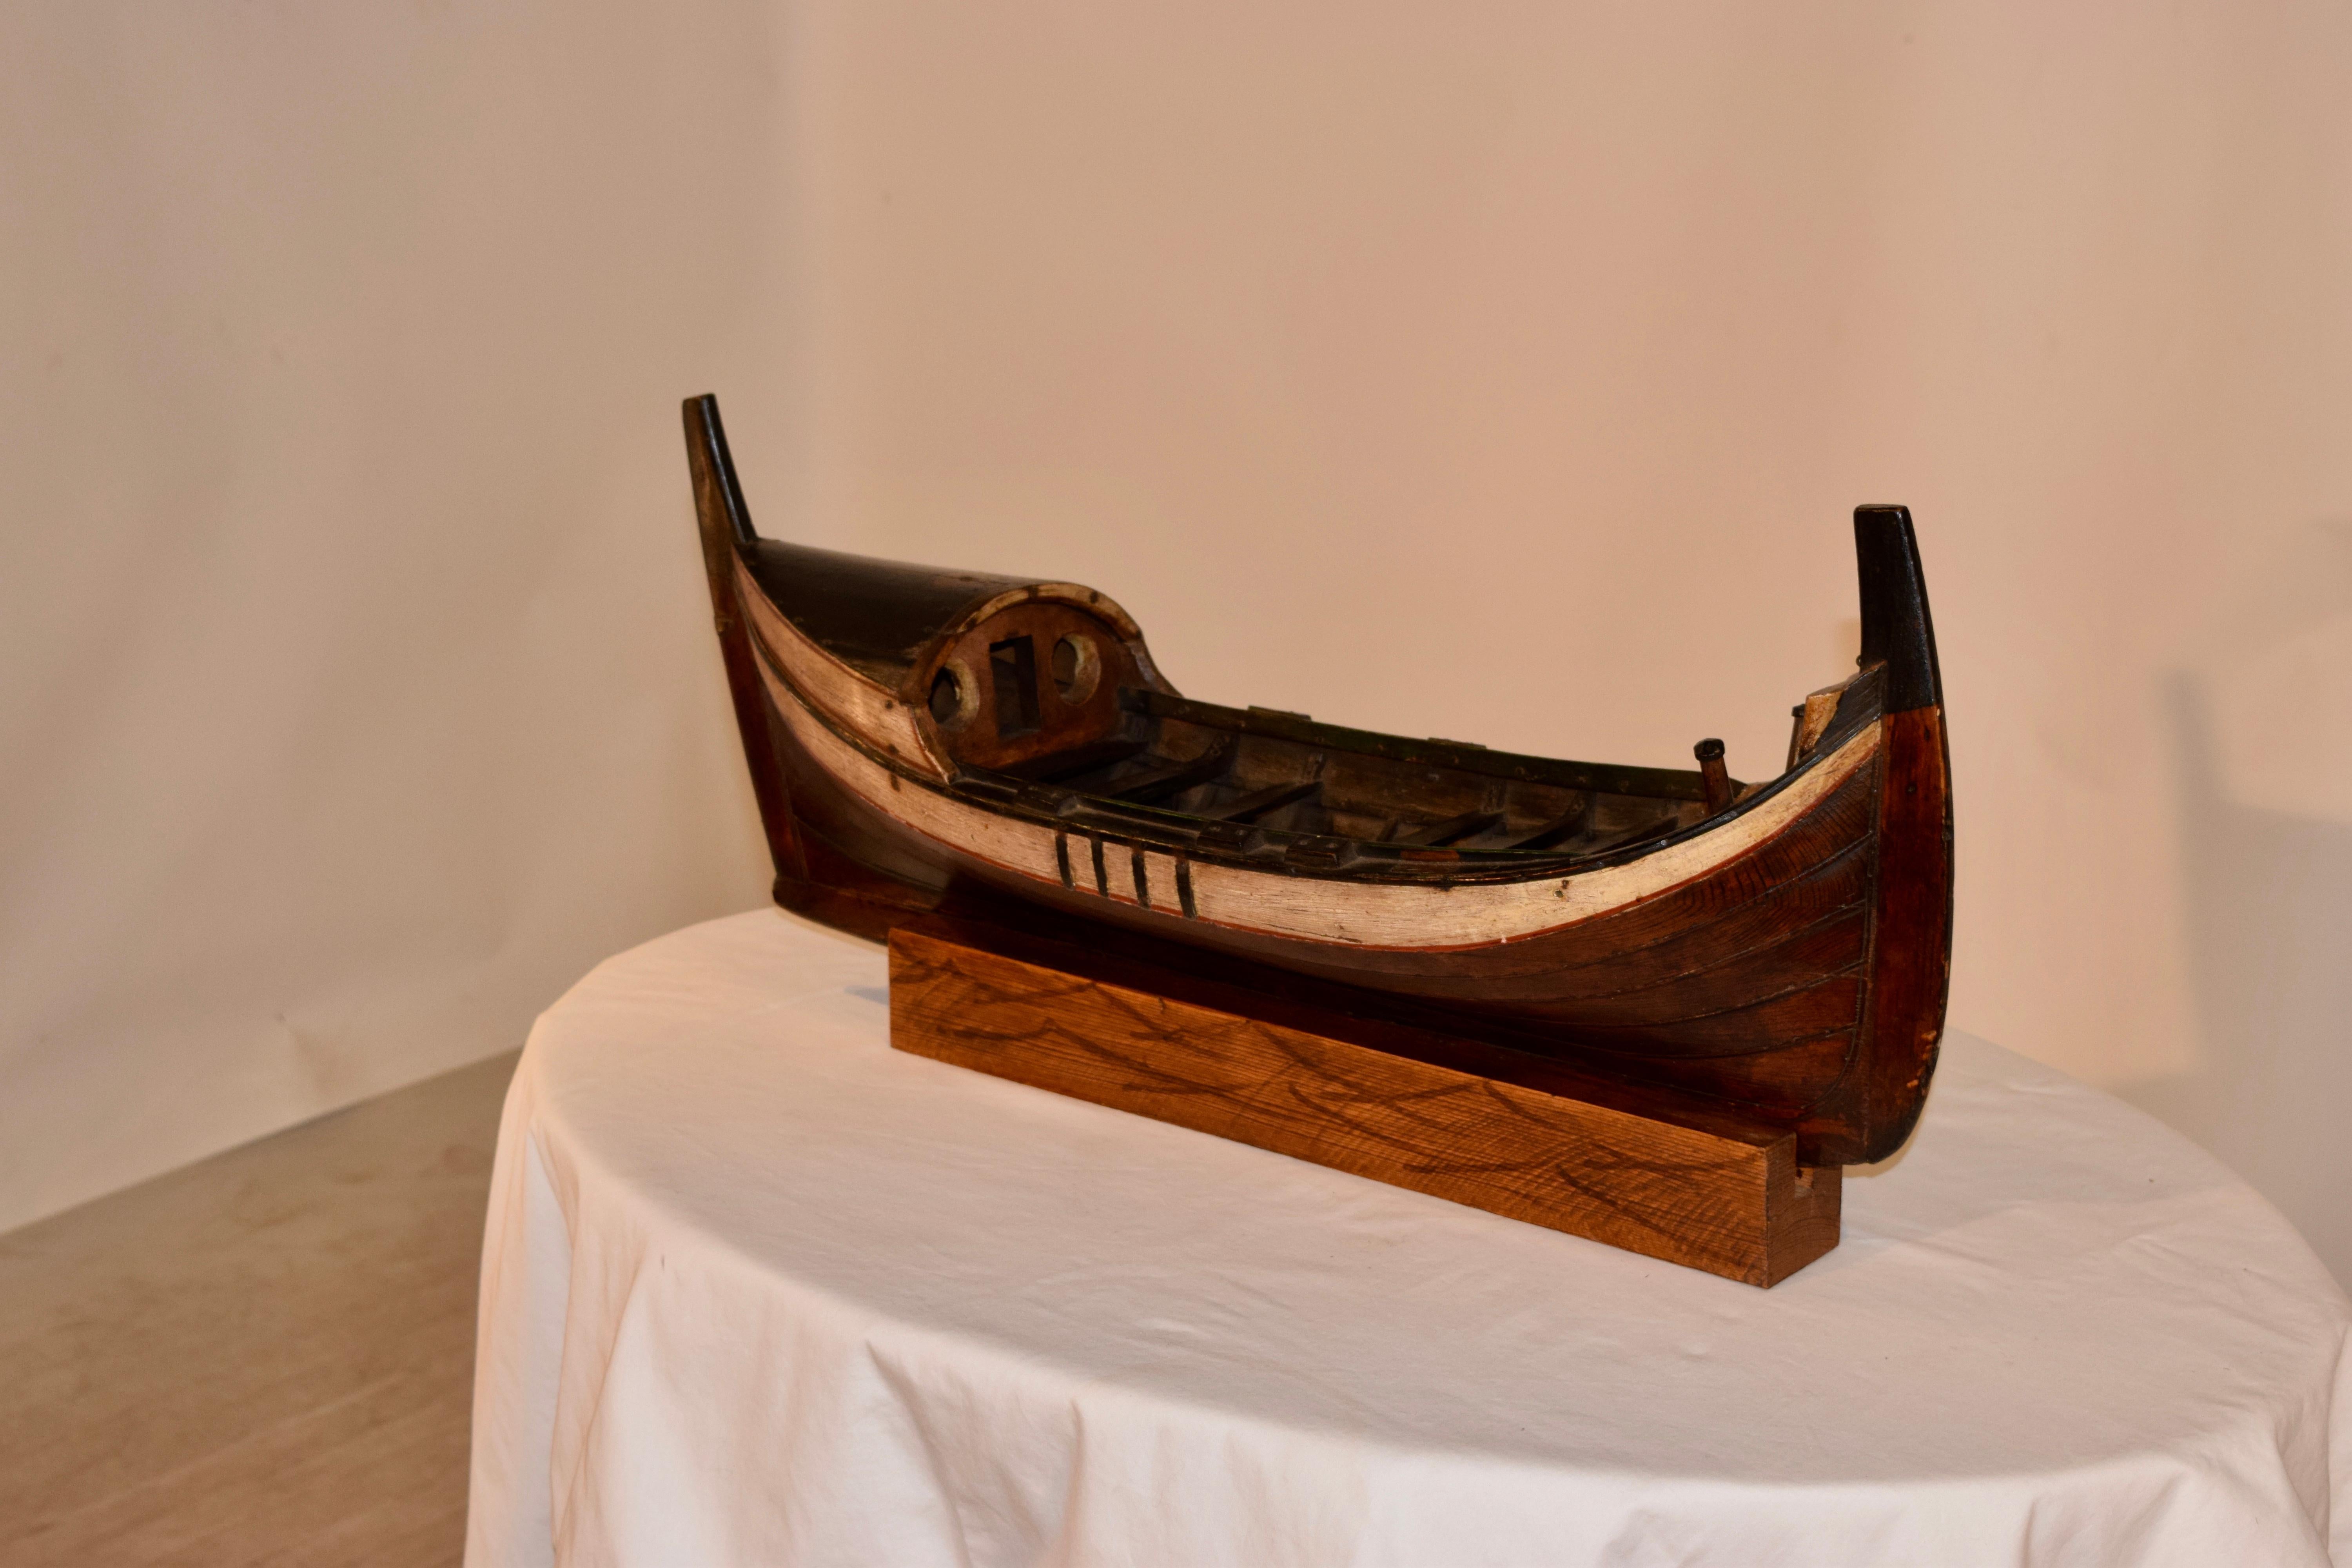 19th century rustic model of a boat on a handmade stand, which is removable. The boat is hand painted and the stand has hand painted waves on it.